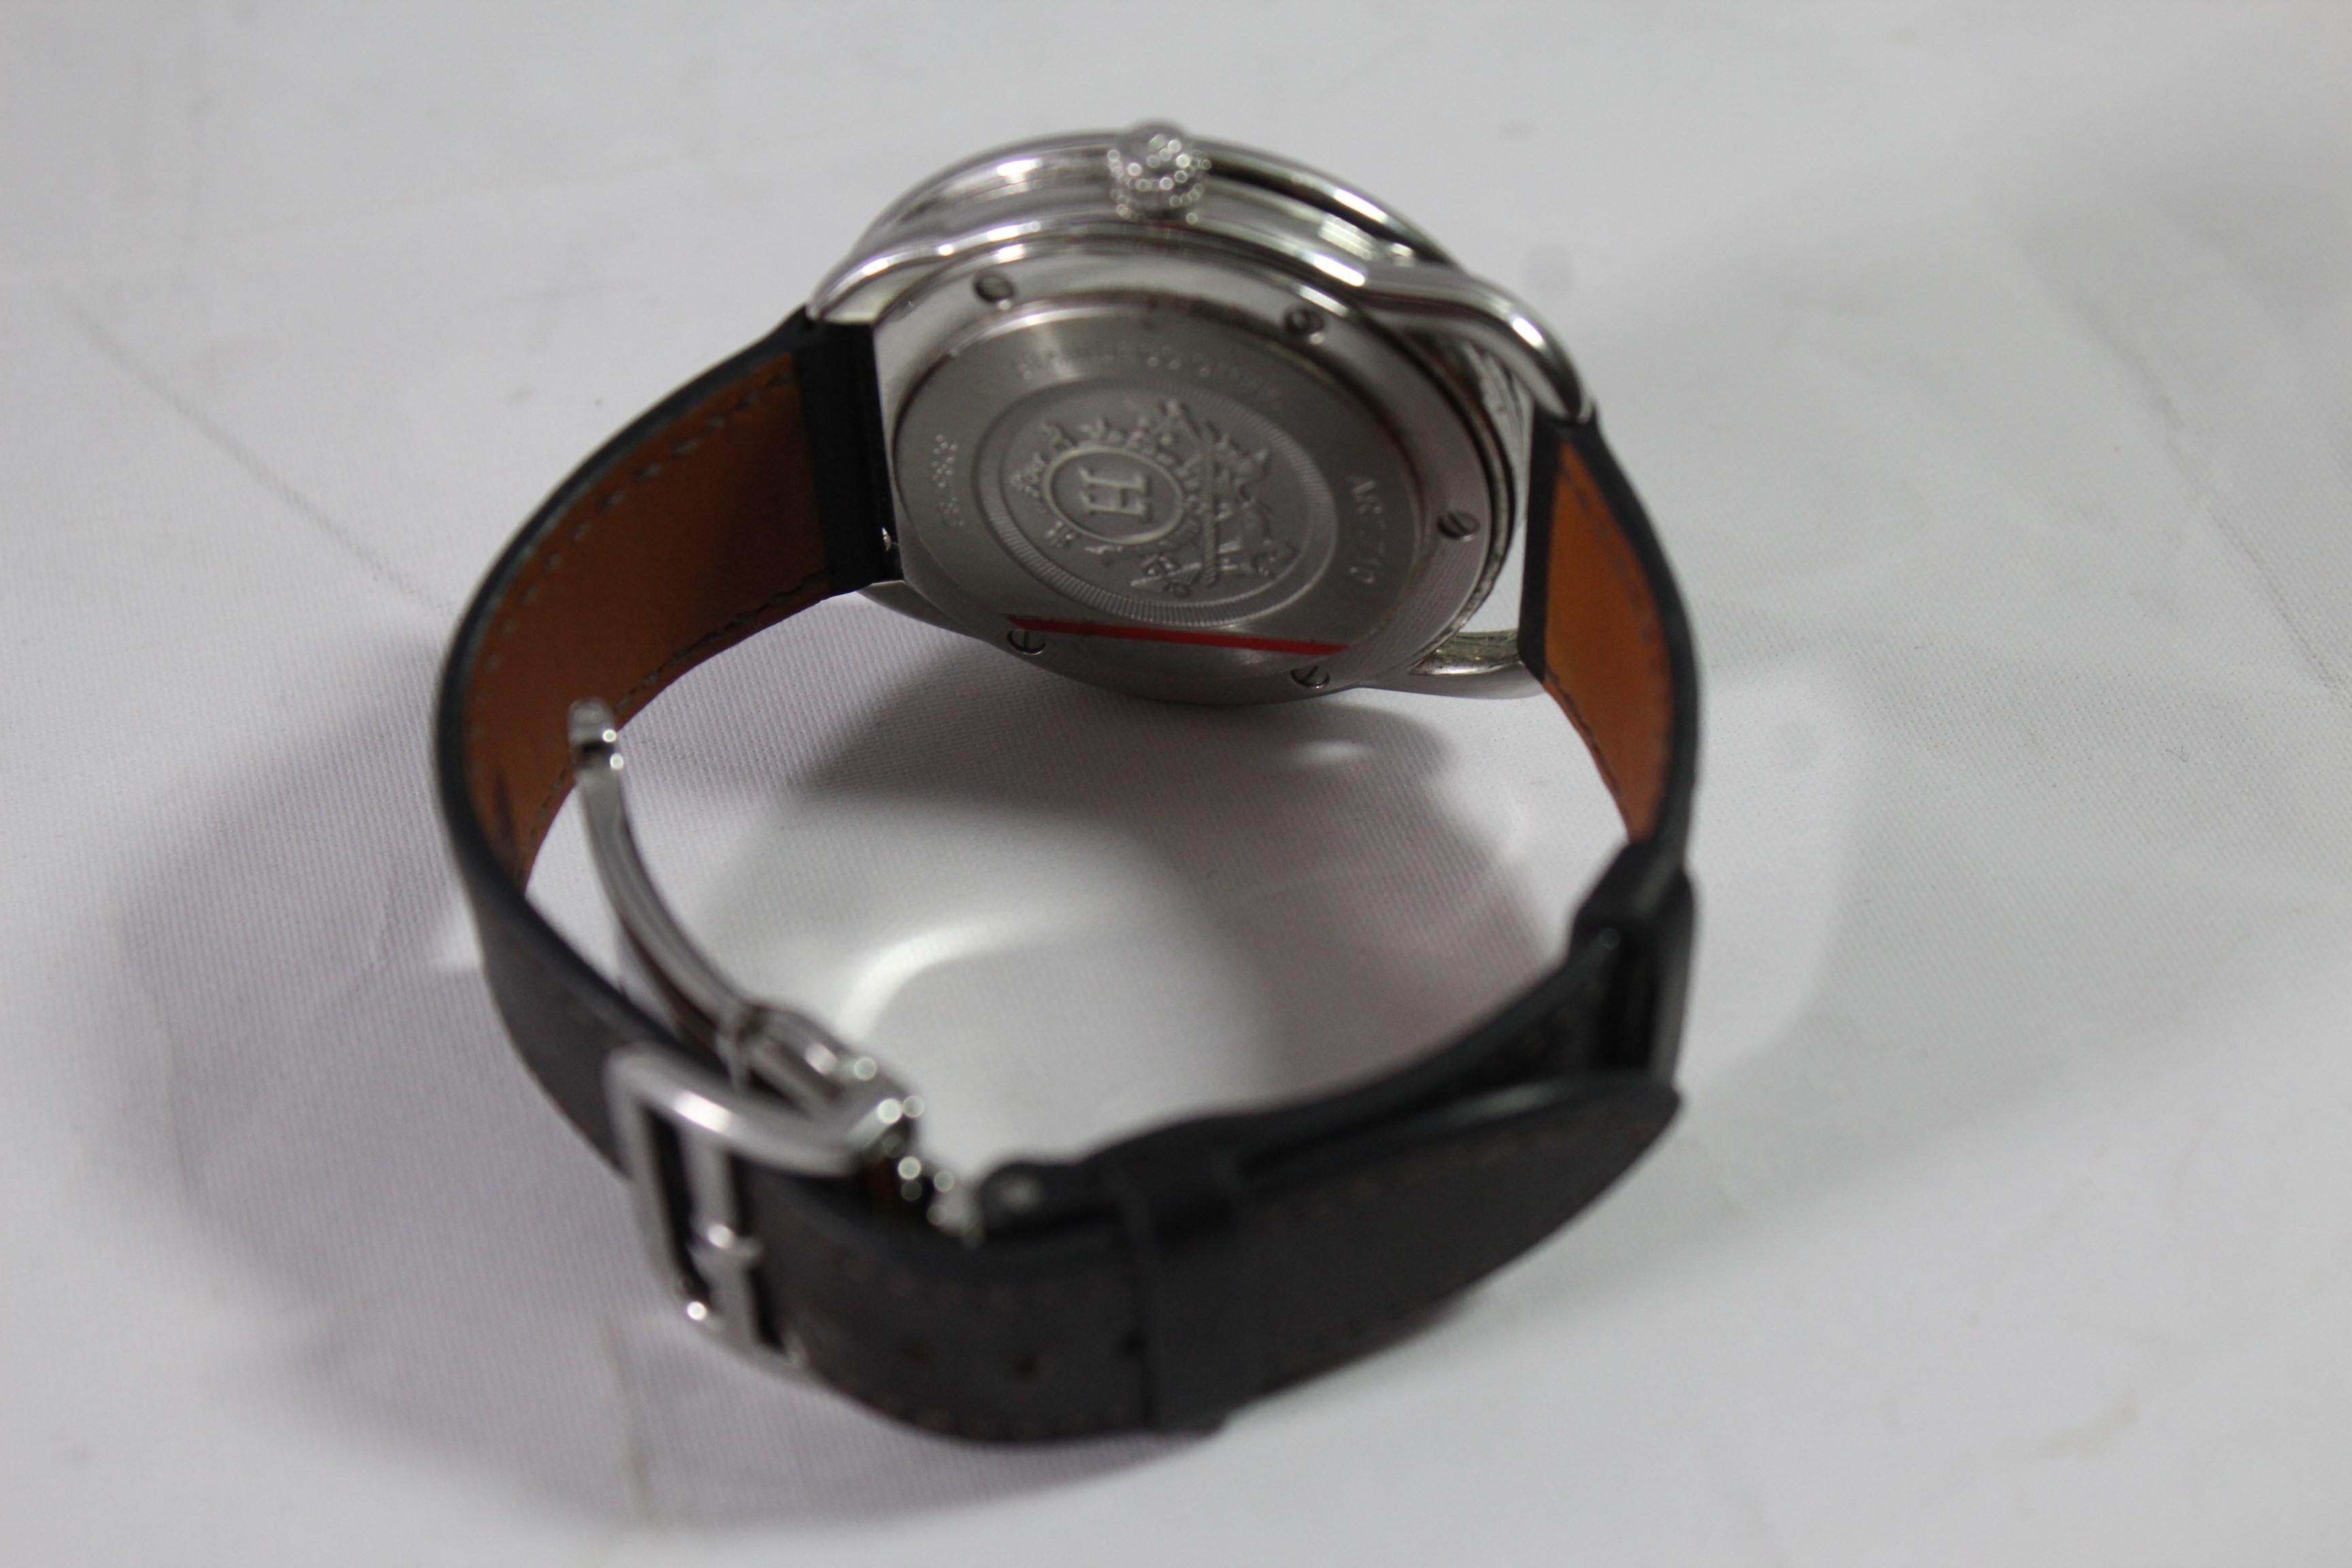 Nice Hermes Stainless Steel automati watch with deployment buckle
Case 40mm
Band Hermes Leather band.
Soold with Hermes box
Good condition just some really light signs of use
Retaiil price of the watch + buckle 6500$
